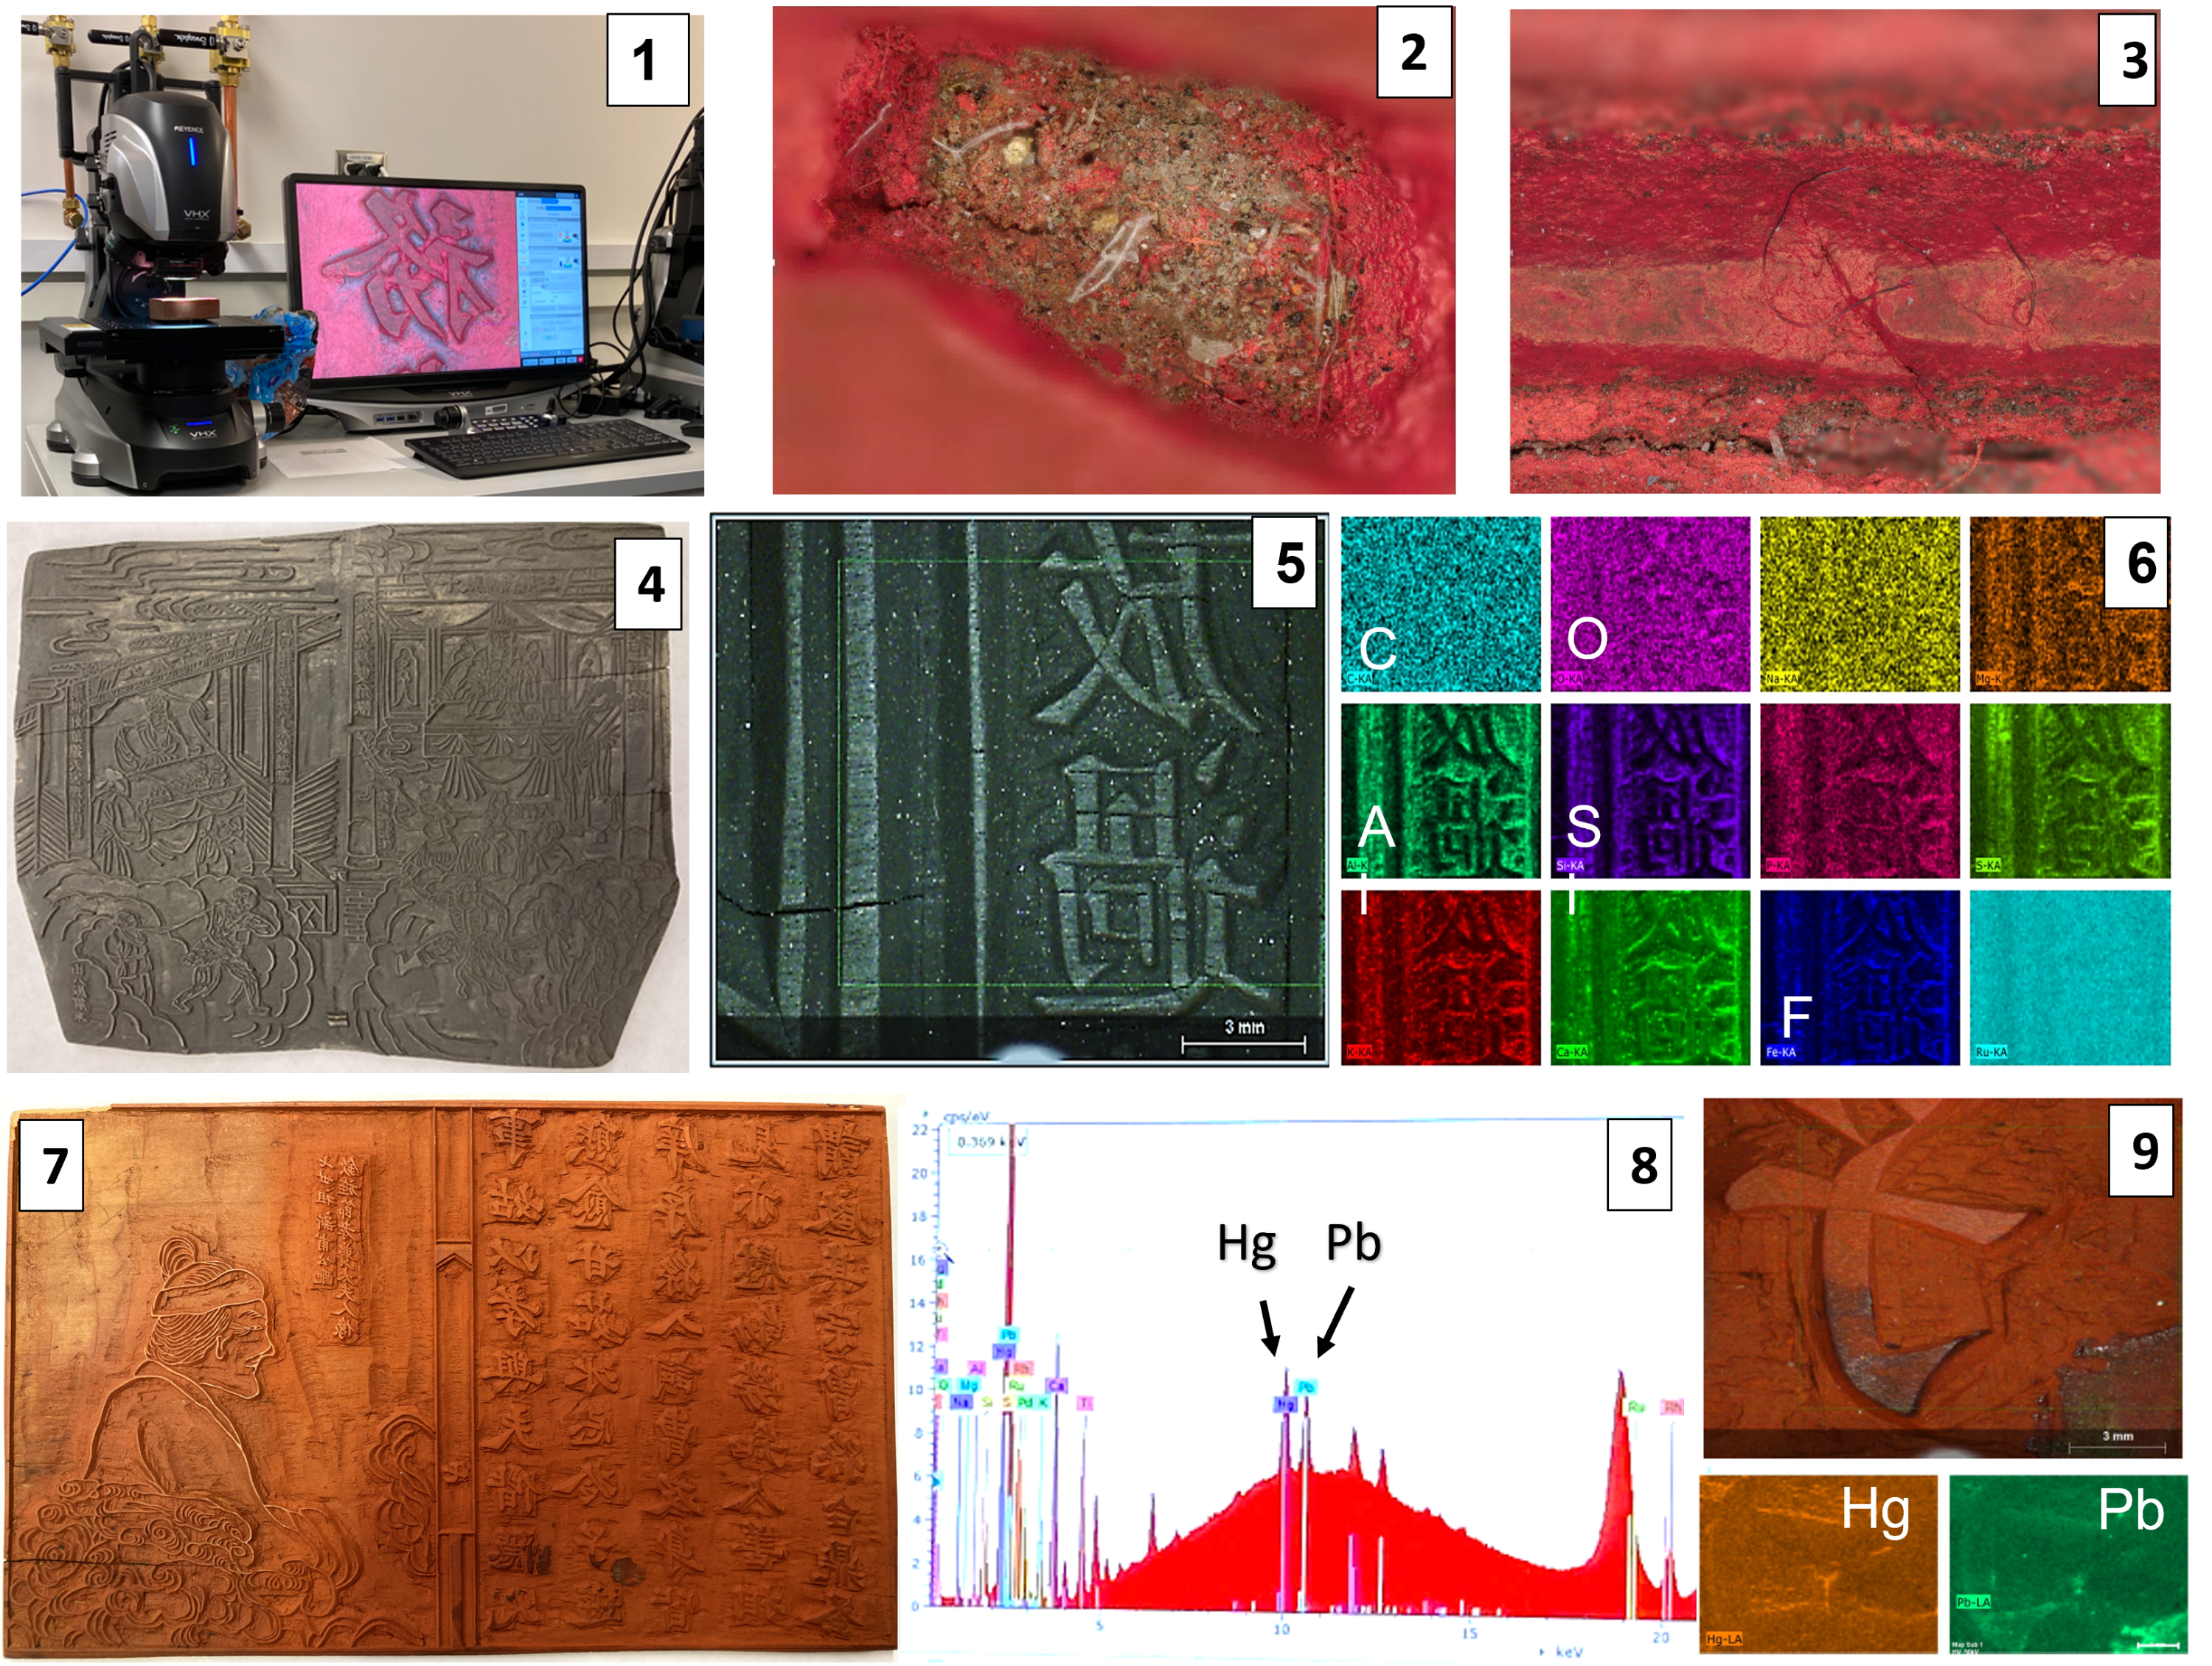 This image is a combination of 9 photos that are contained in the article "Look Beneath the Surface: Analytical Techniques Reveal Museum Artifact Secrets" 	Photograph of Chinese woodblock being imaged on a Keyence microscope.			Microscope image of space carved into the woodblock to form a character.			Microscope image of hair embedded into the ink and crack in the woodblock.			Chinese woodblock with remnants of black ink.			Image of the area of X-ray analysis of a black-colored Chinese wood